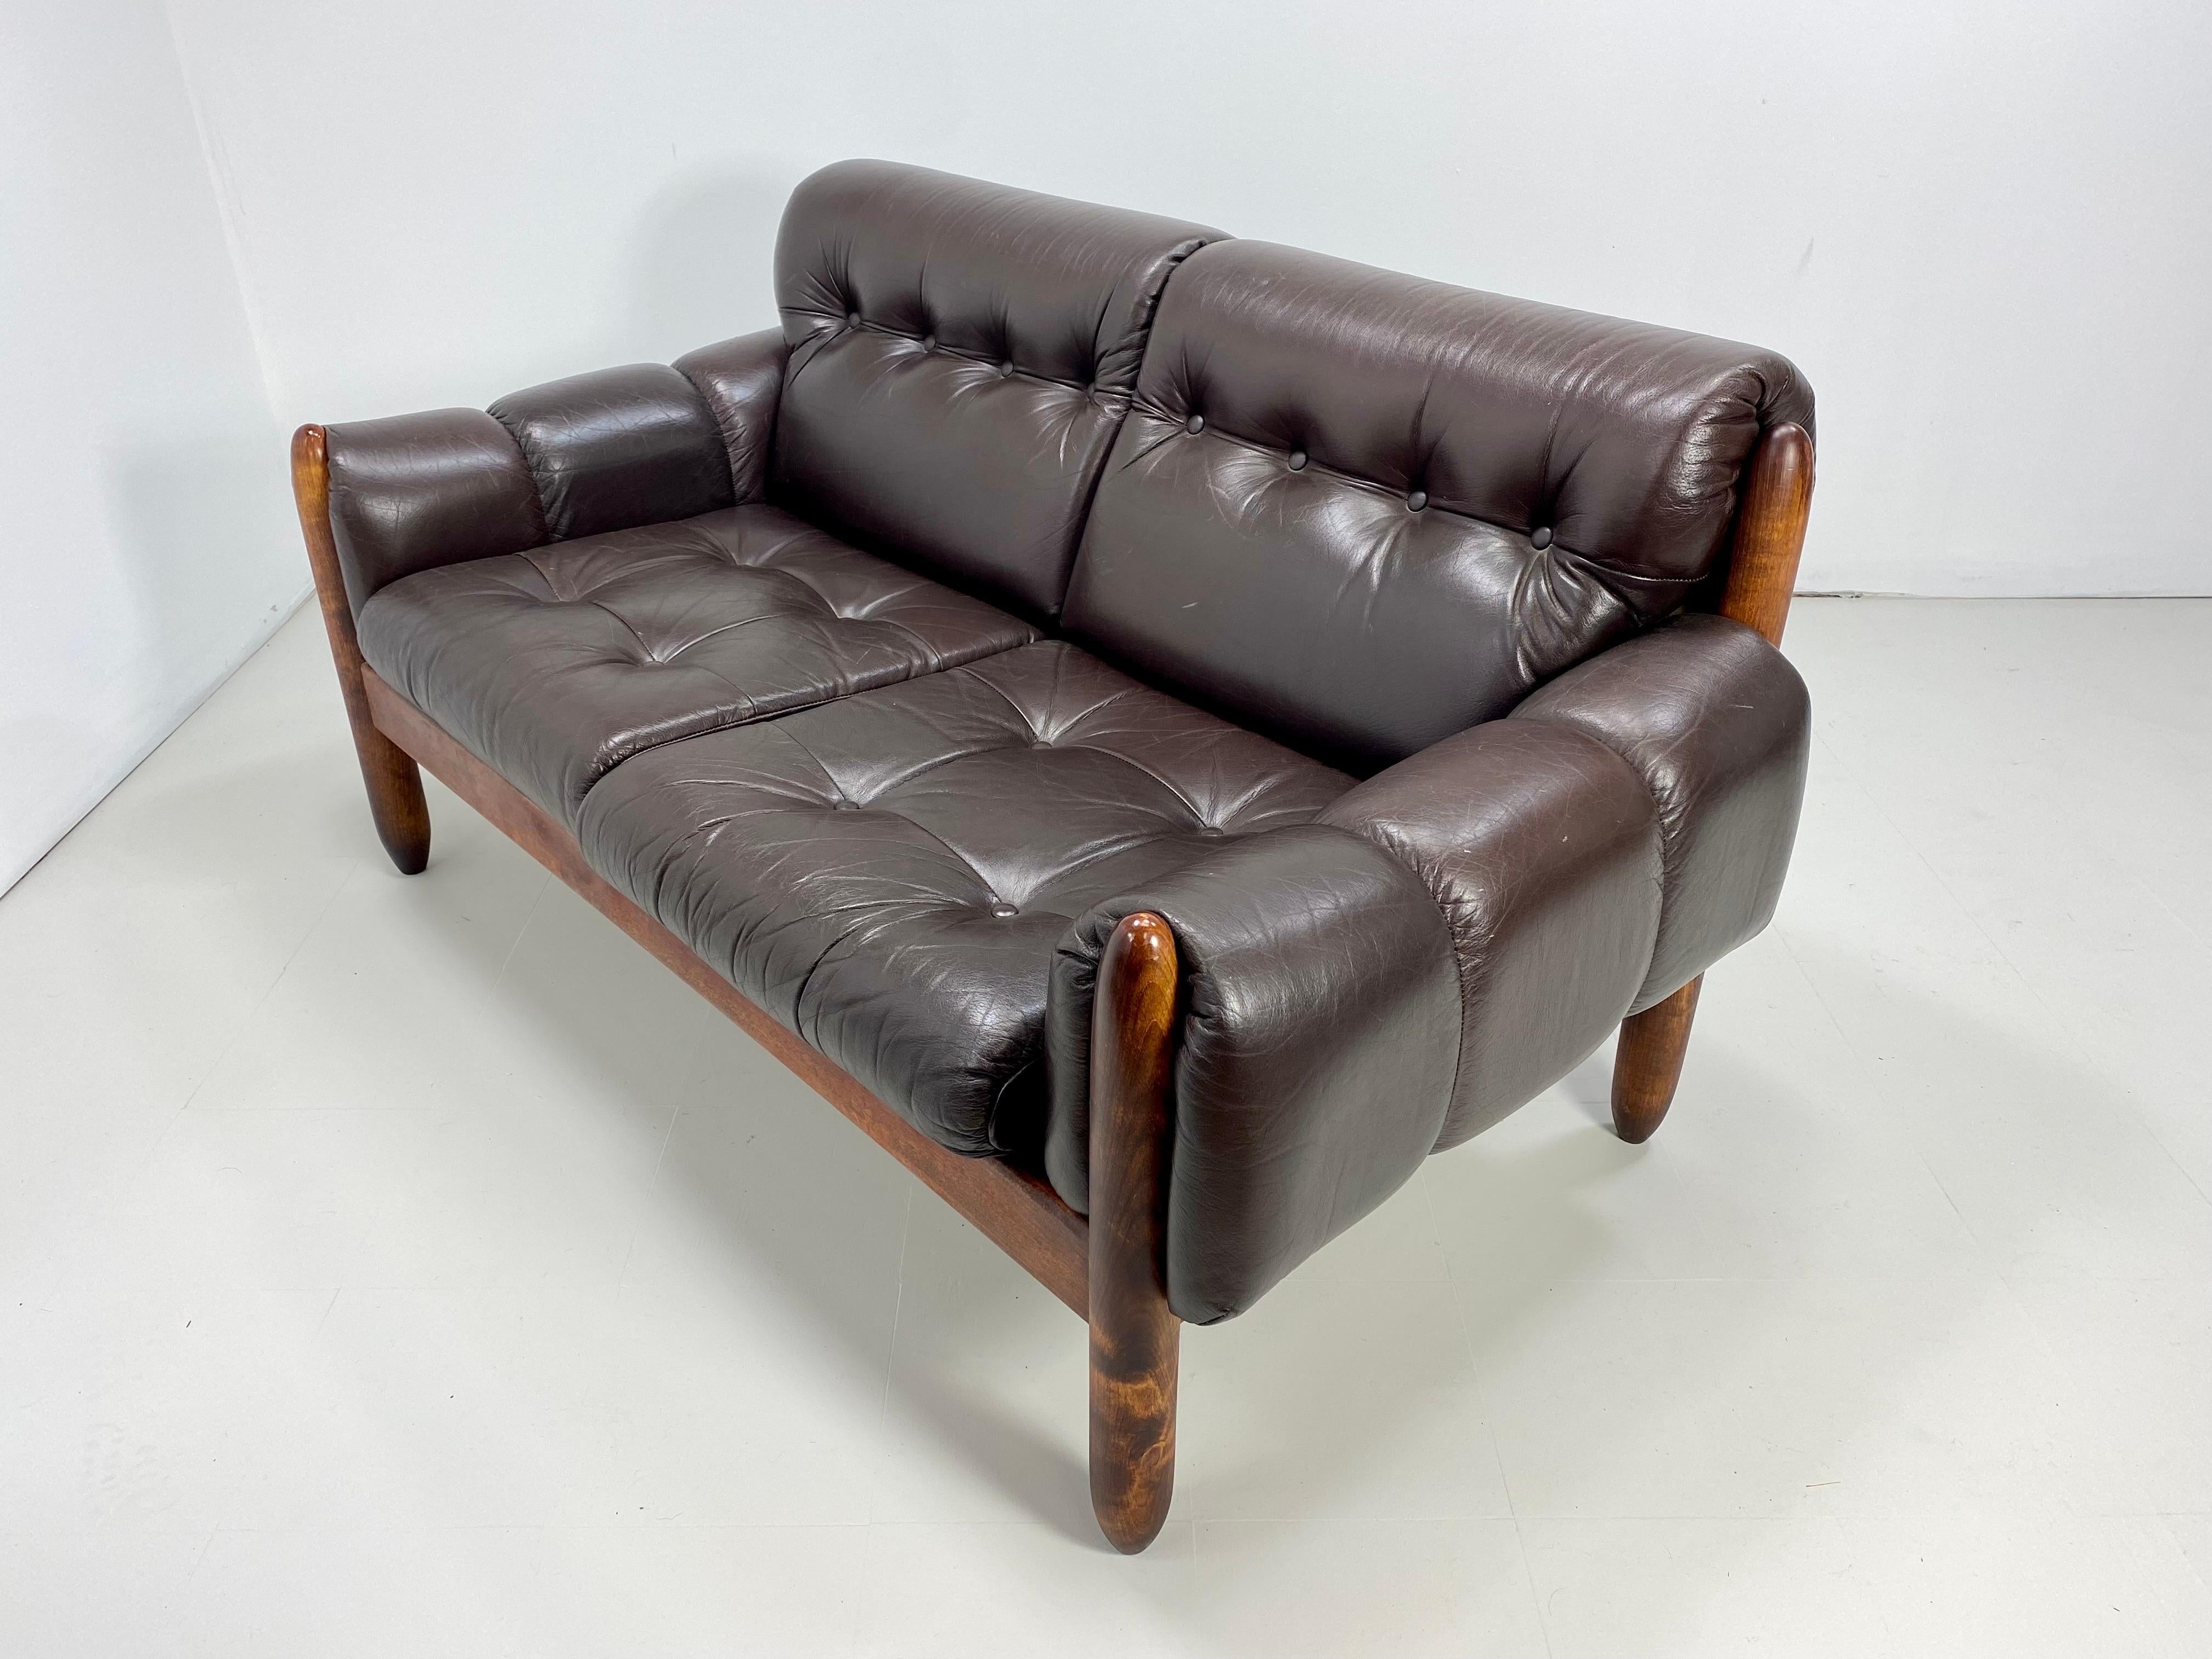 1970s Brazilian Leather Sofa /Settee. Wood frame with button tufted dark brown leather upholstery.


